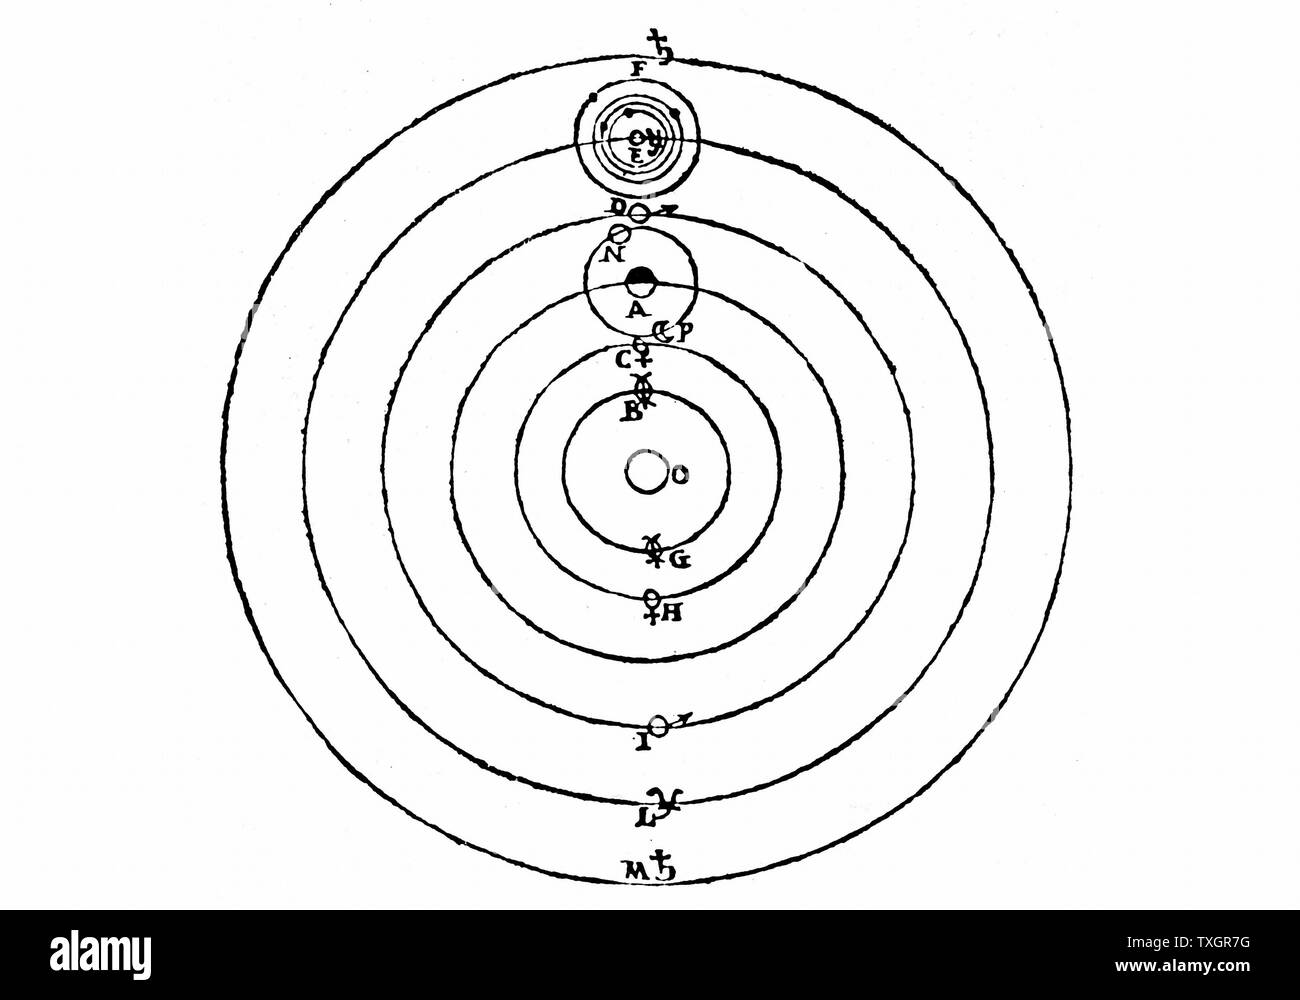 Galileo's diagram of the Copernican (heliocentric) system of the universe showing also his own discovery: the four satellites (moons) of Jupiter From Galileo Galilei 'Dialogo' 1632 Engraving  Florence Stock Photo